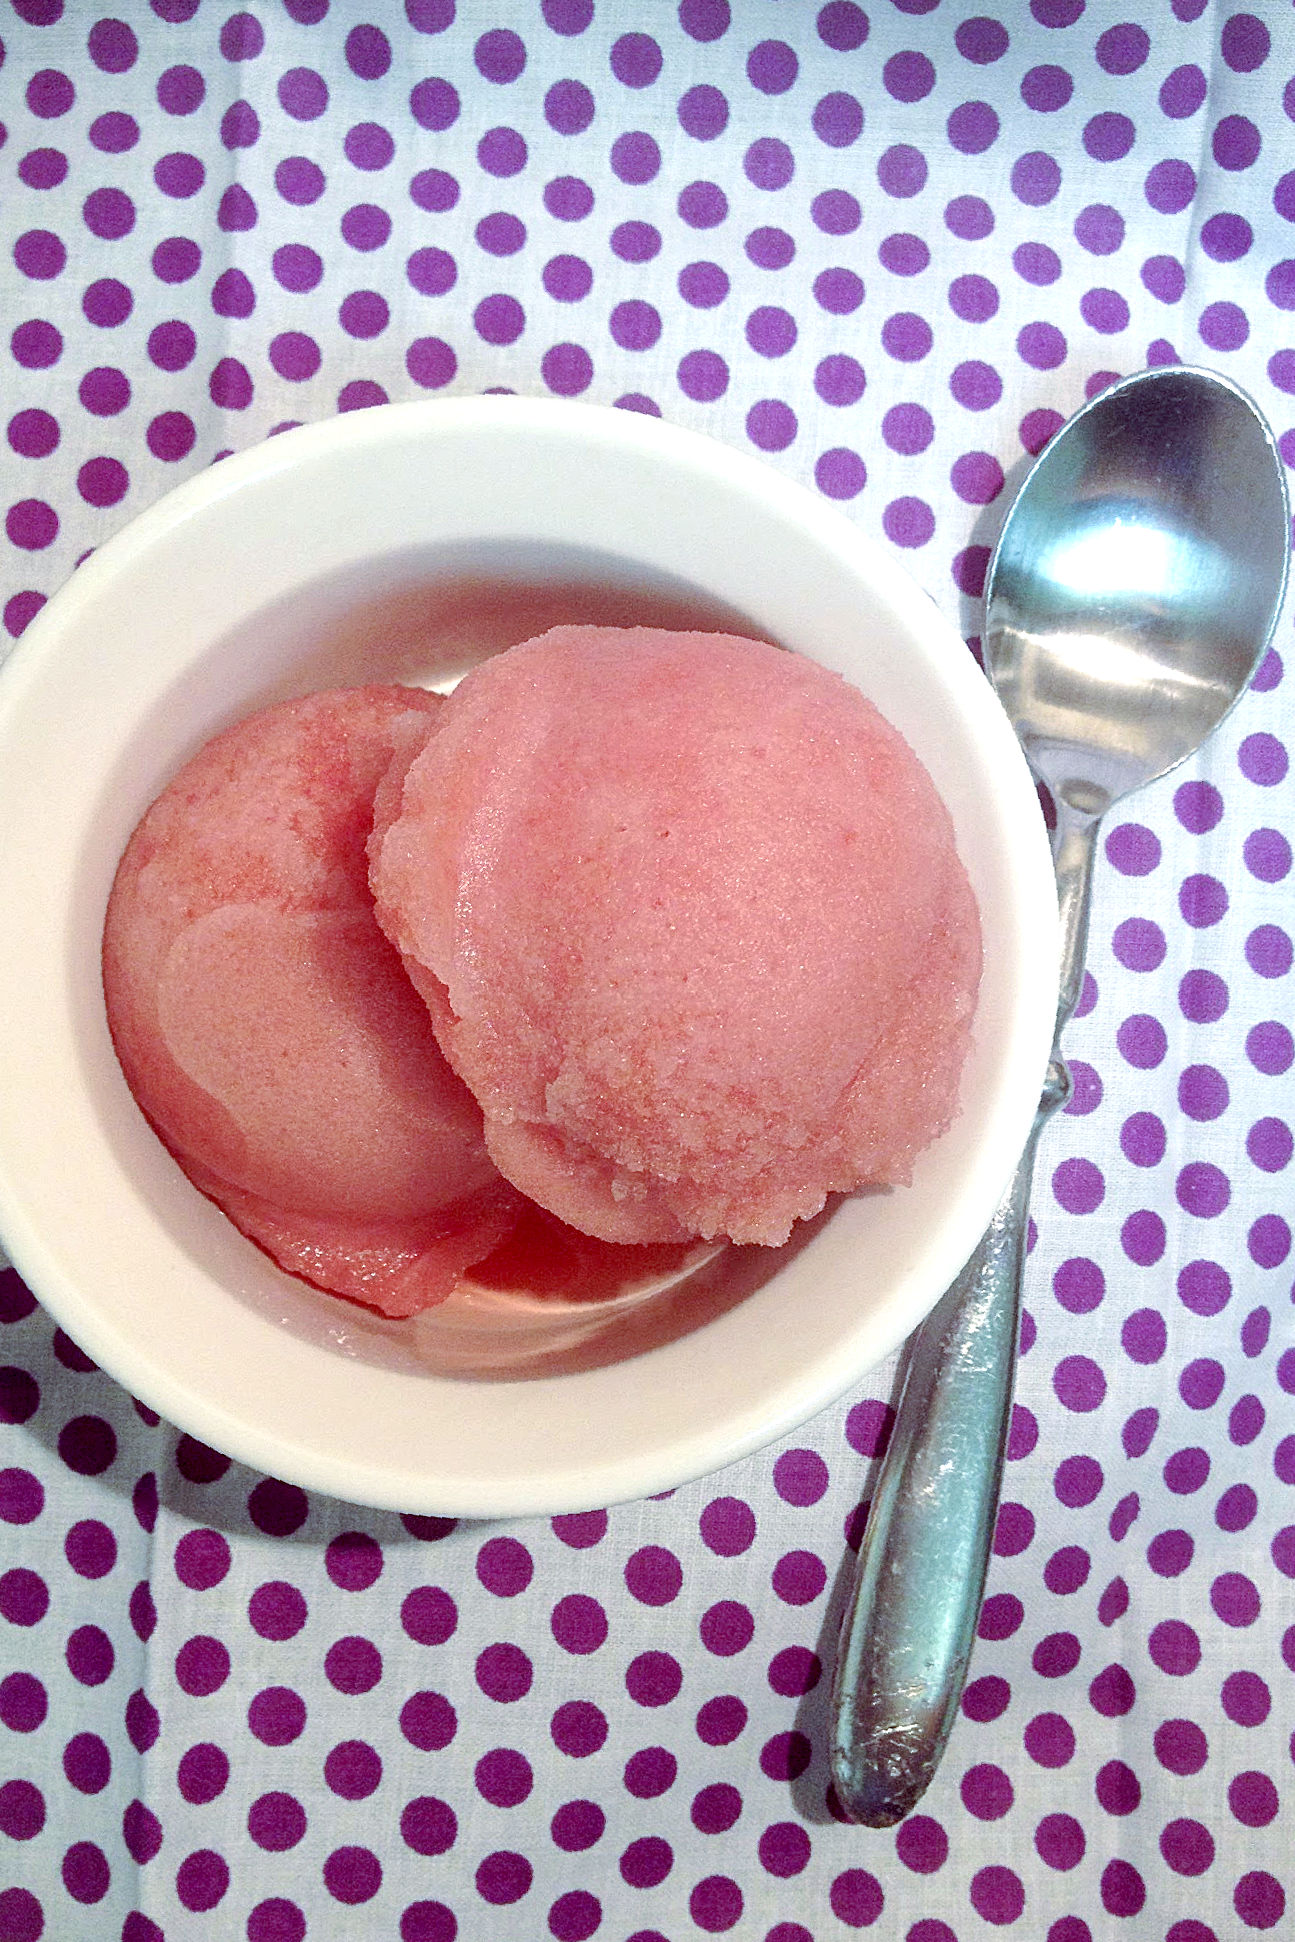 The sweet, the tequila, the tart pomegranate.  They all just mesh perfectly in this sweet, cold and refreshing Pomegranate Tequila Sorbet!